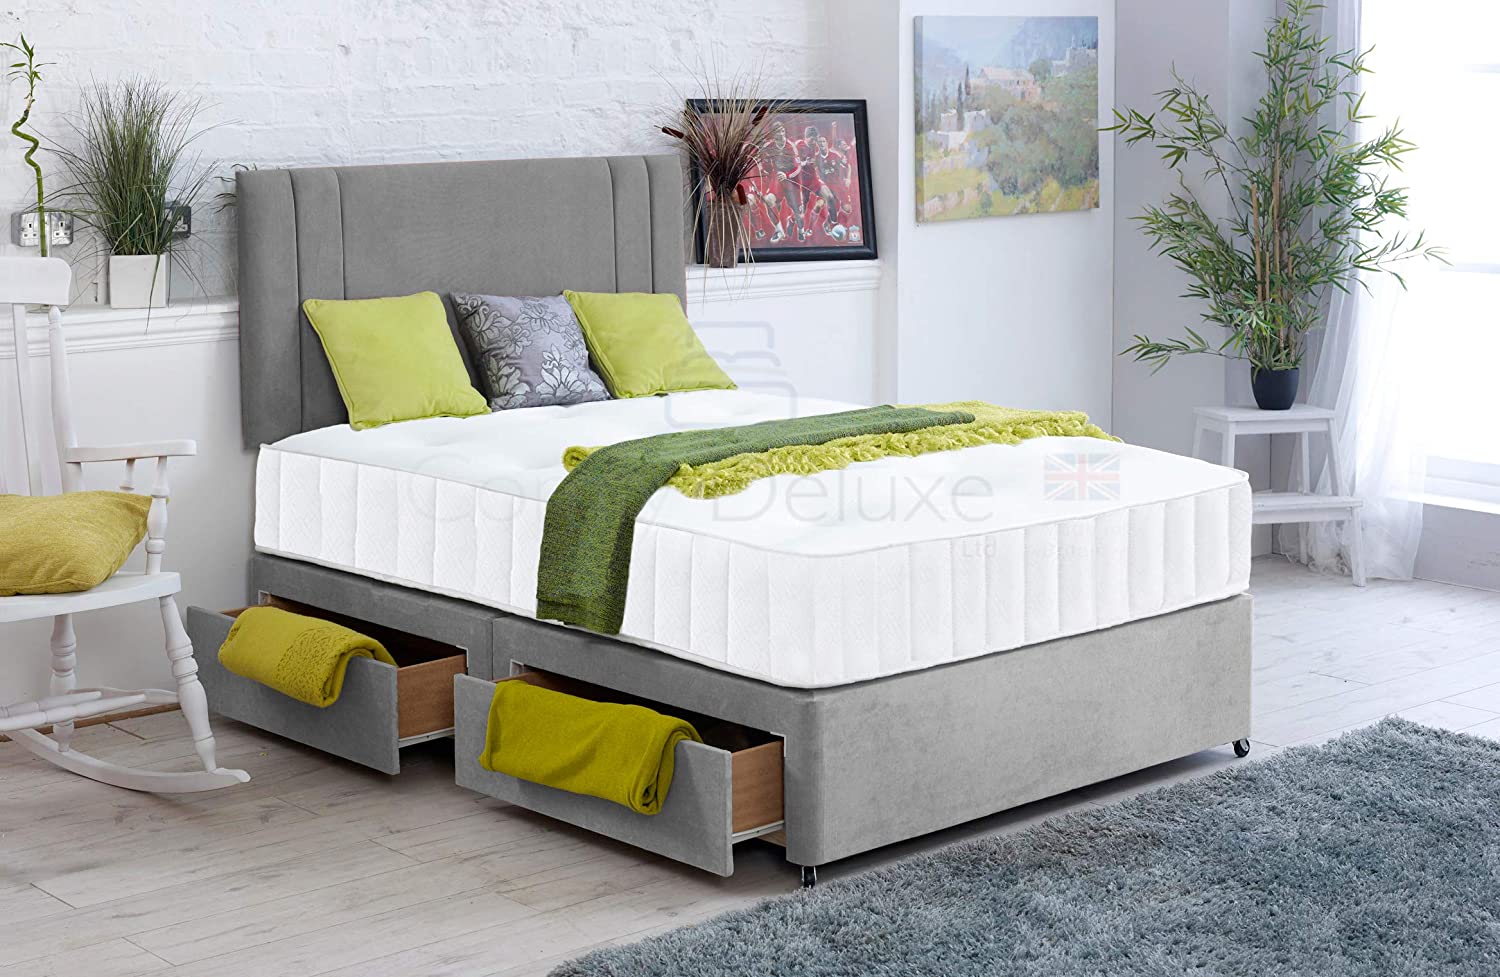 Silver-Soft-Velvet-Divan-Bed-Set-Memory-Mattress-Matching-Headboard-Storage-Drawers-Side-Drawers-Crush-Plush-Faux-Leather-Memory-Spring-Vertical-Lined-Headboard